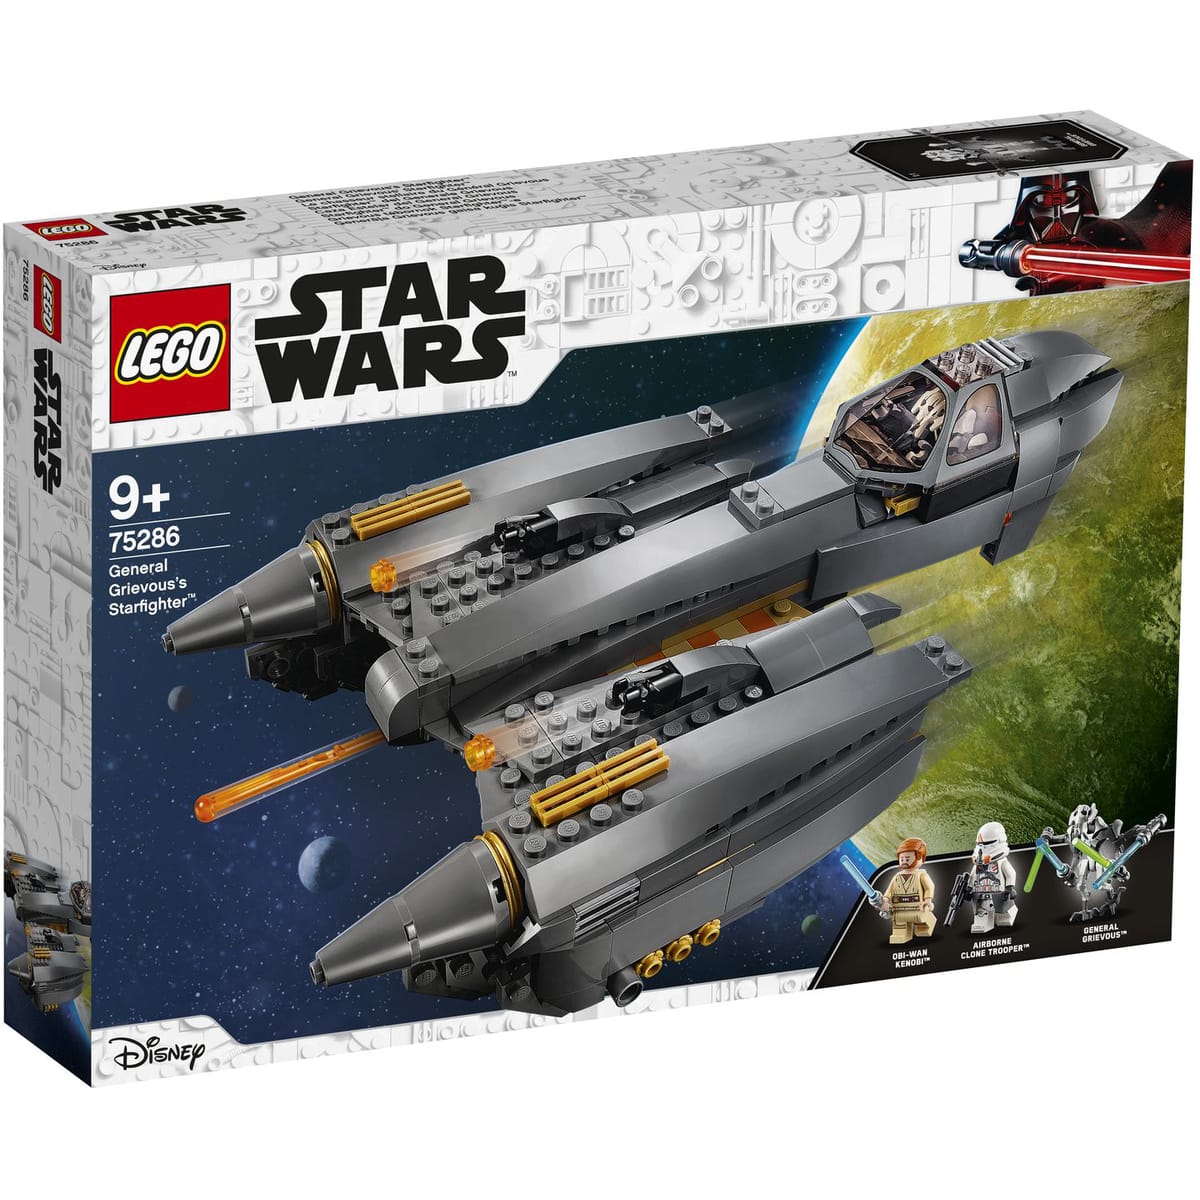 LEGO Star Wars Le Chasseur stellaire – 75286